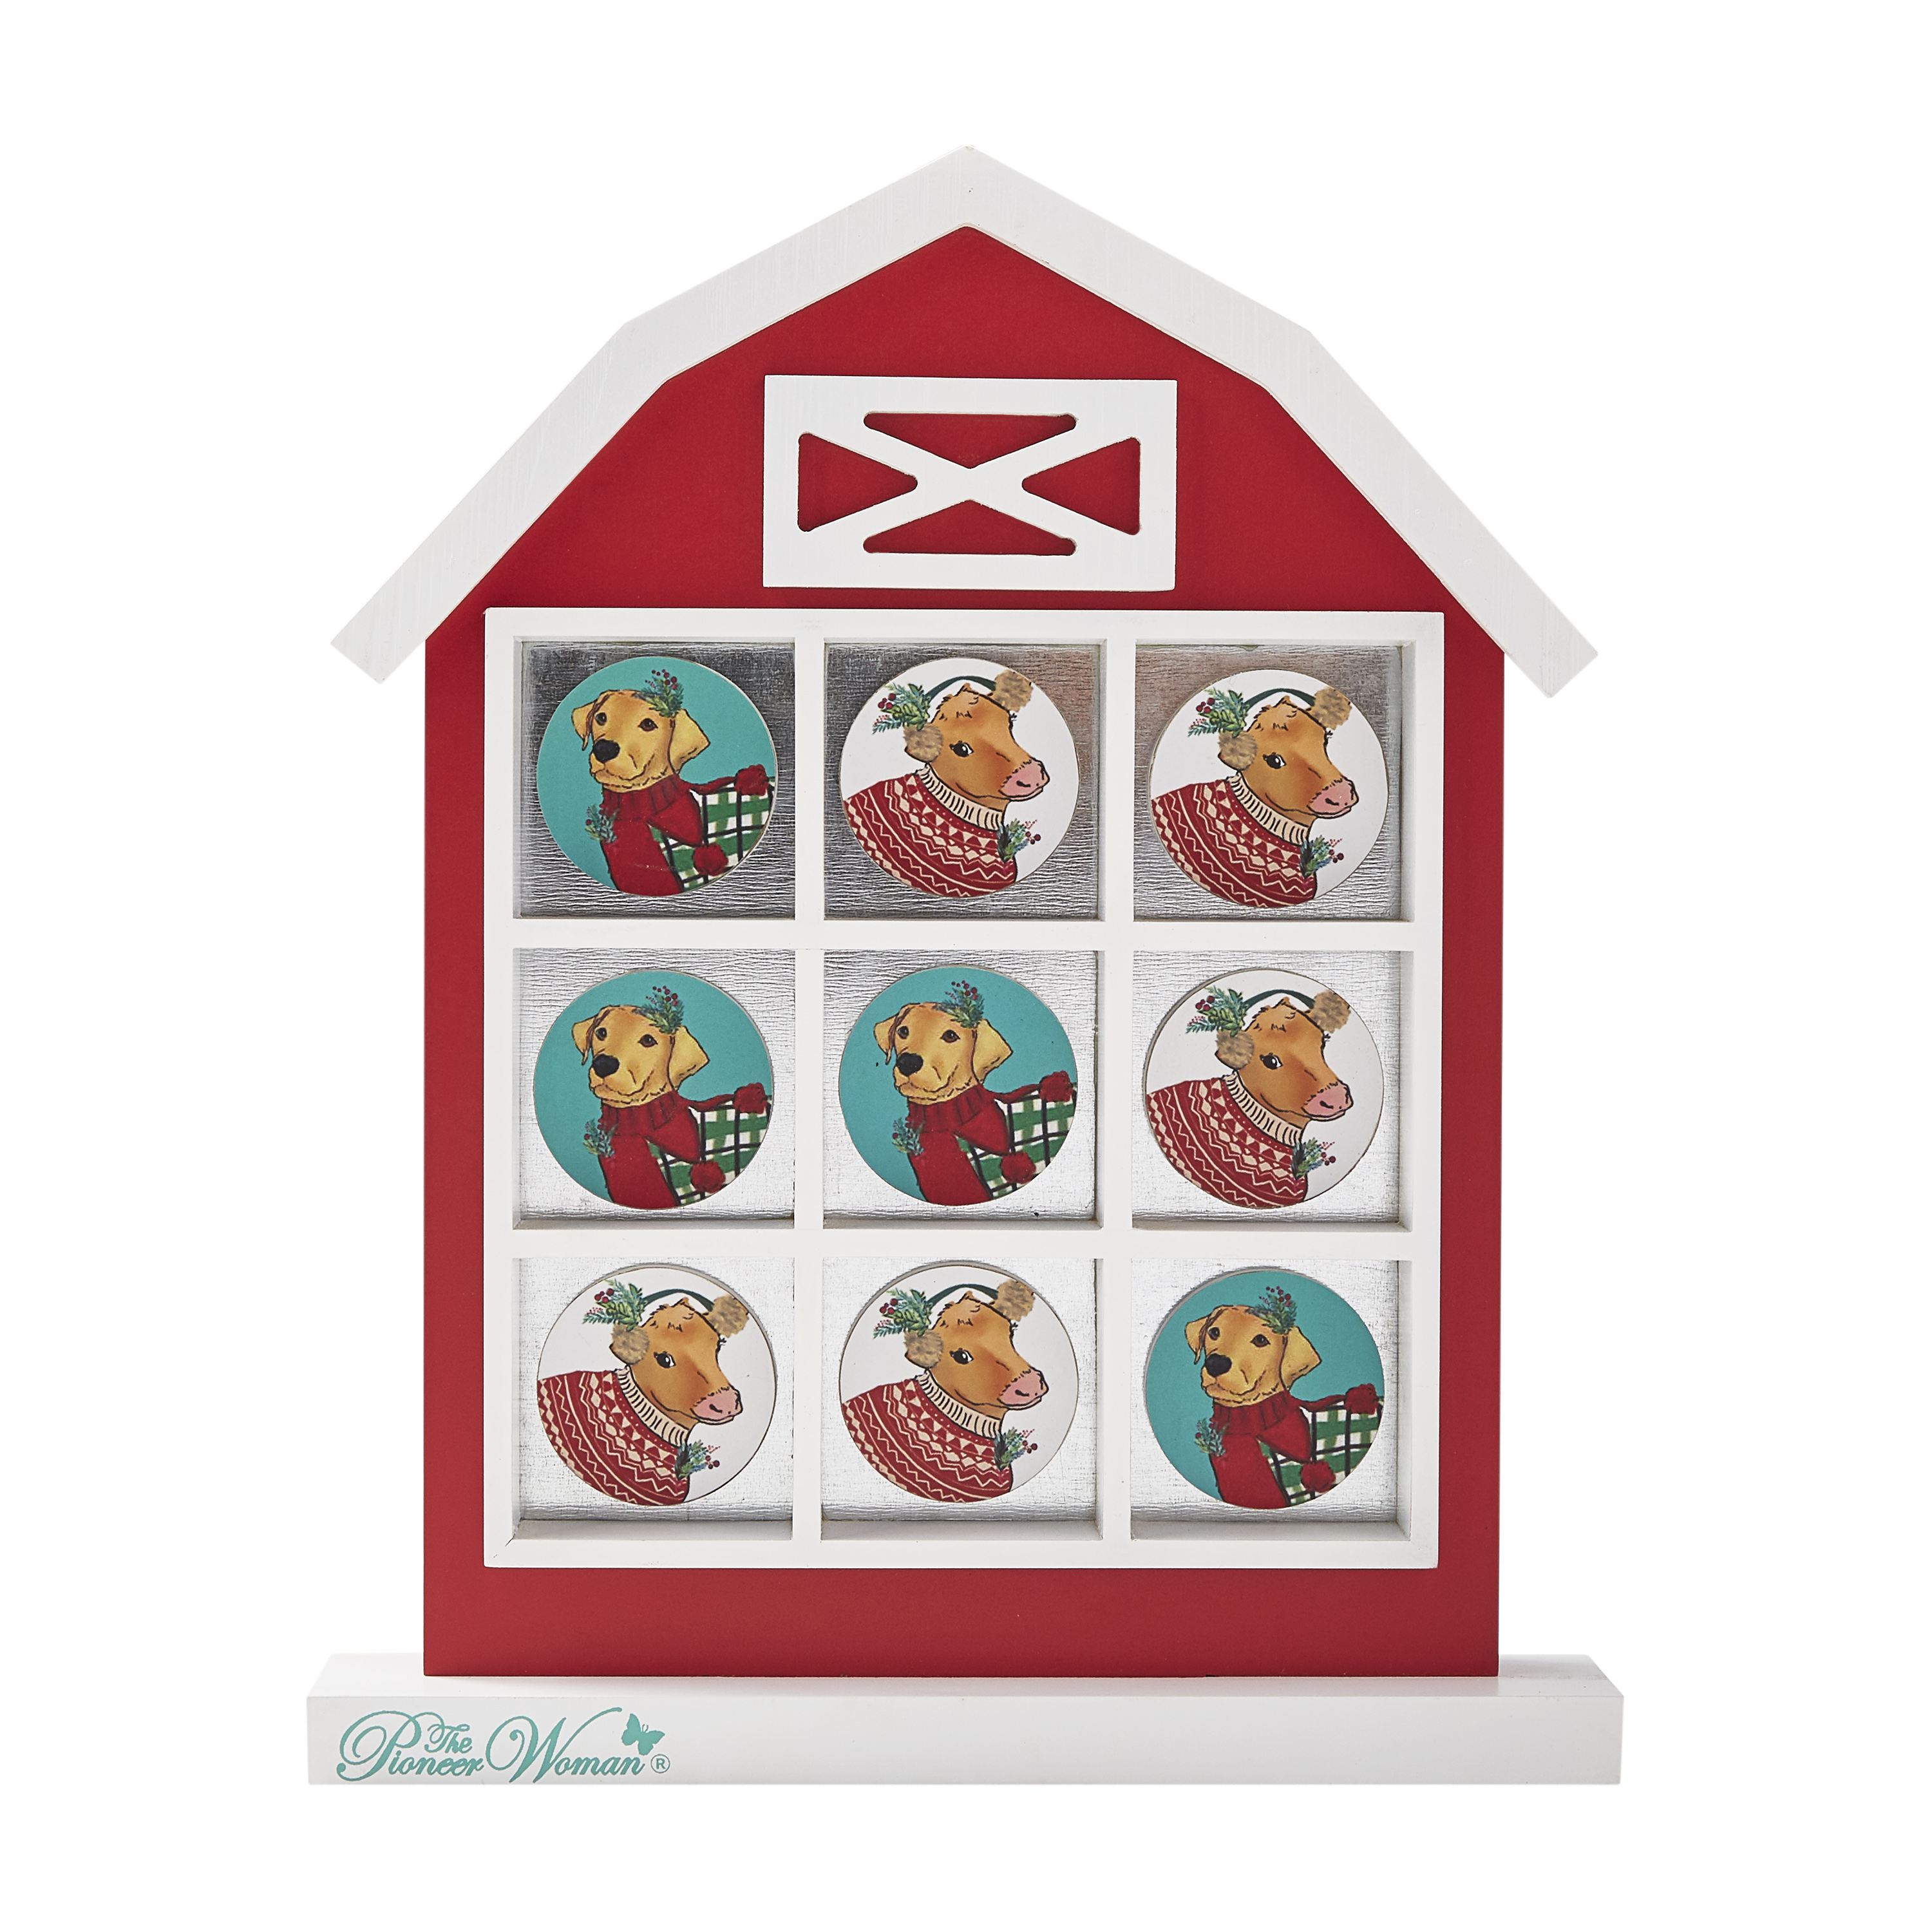 The Pioneer Woman Holiday Barn MDF Tic-Tac-Toe Game - image 1 of 5